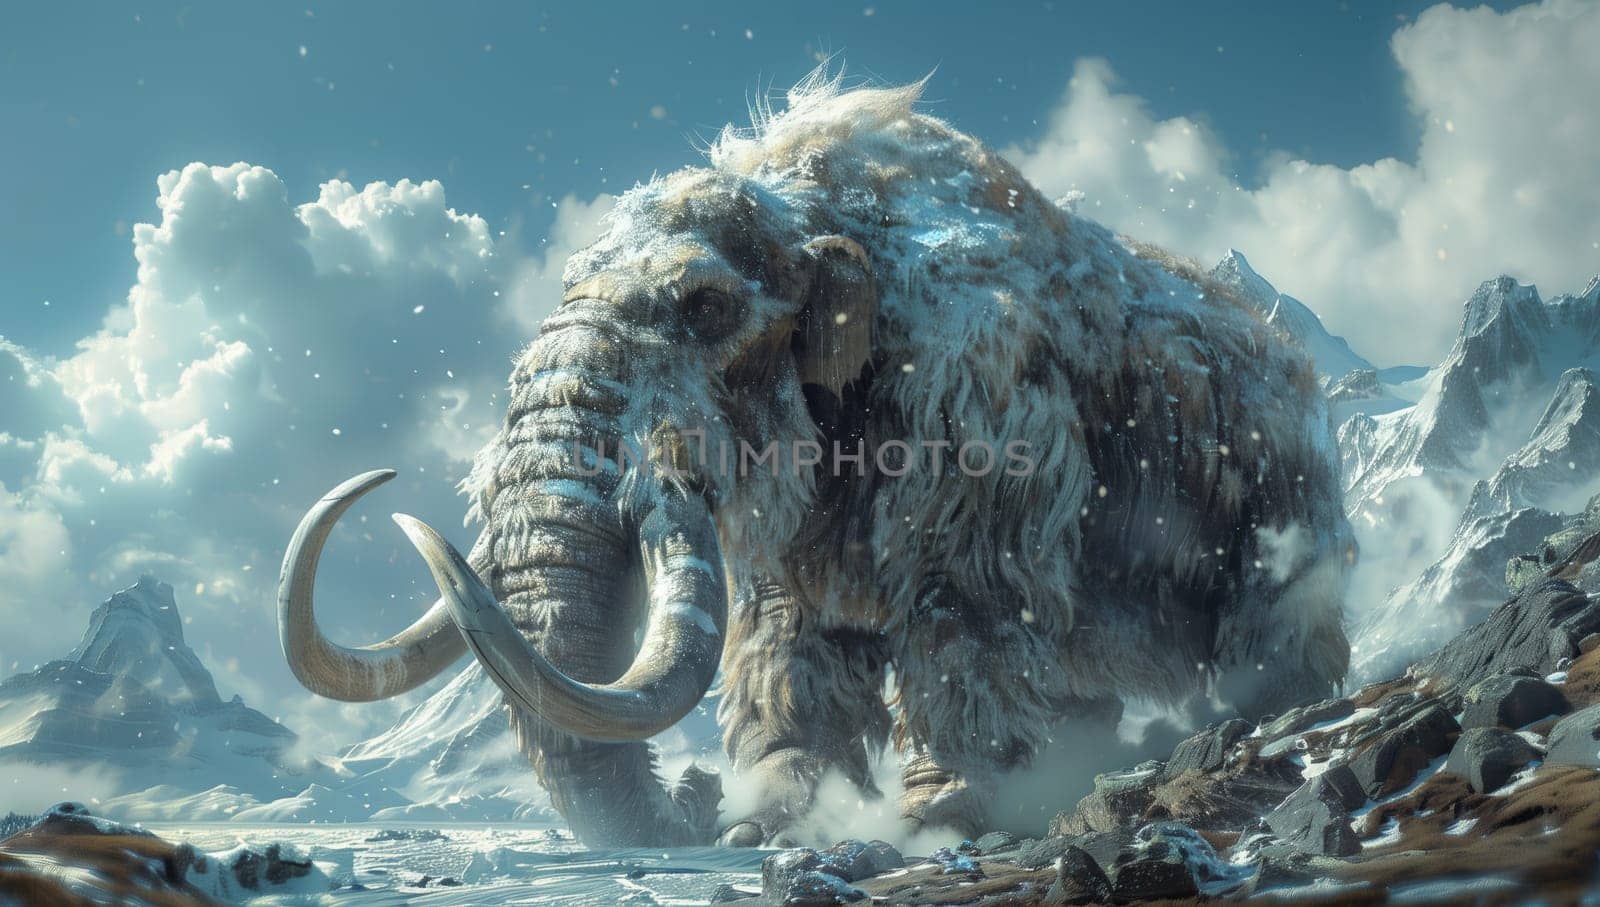 A majestic mammoth strolling through snowy mountains under a cloudy sky, creating a beautiful natural landscape with trees and cumulus clouds